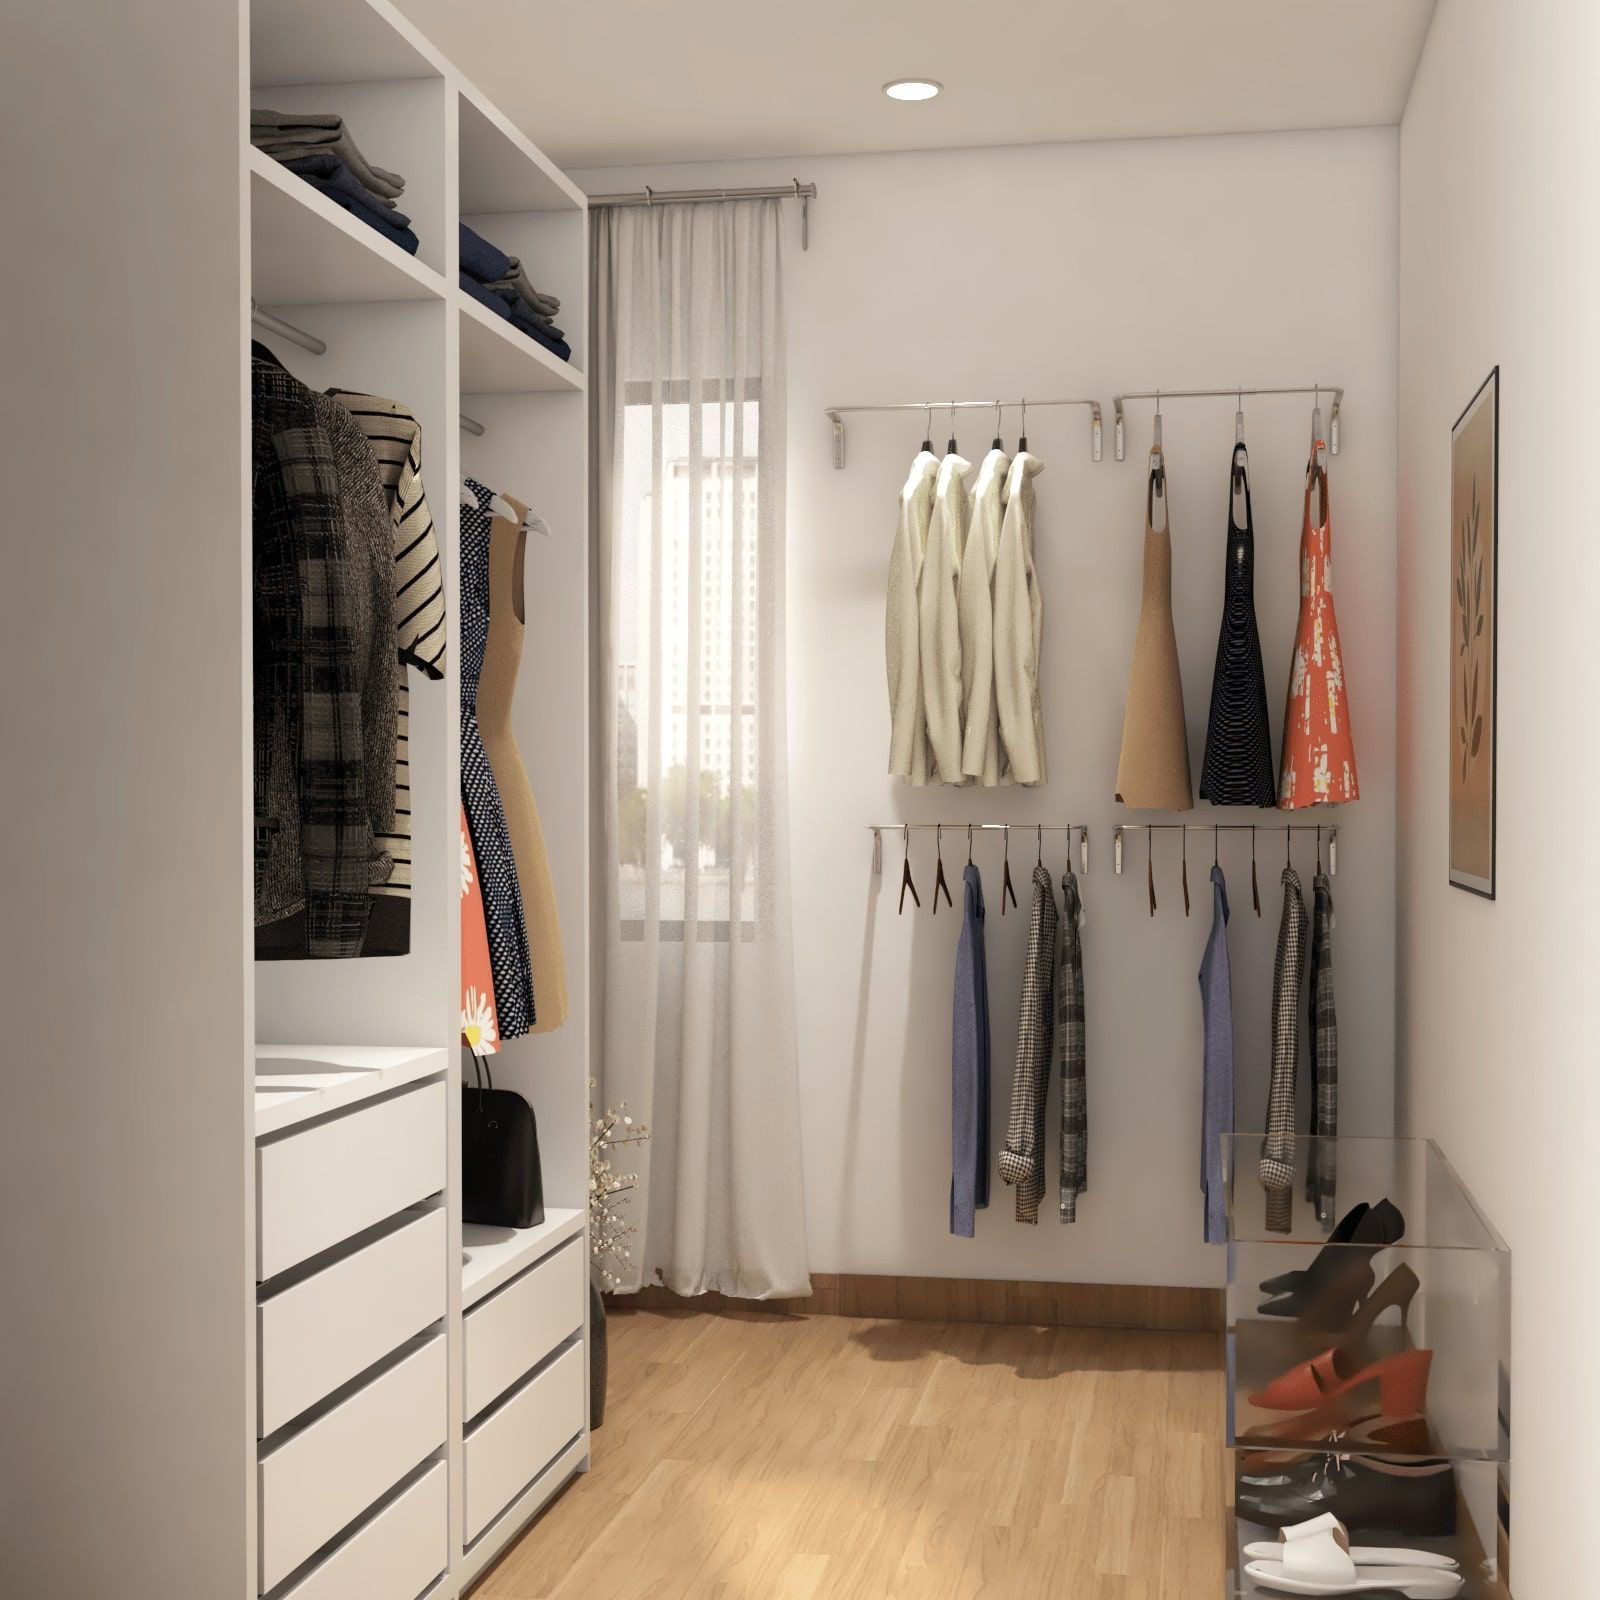 Contemporary Wardrobe Design With Separate Wall Rack And Glass Shoe Display